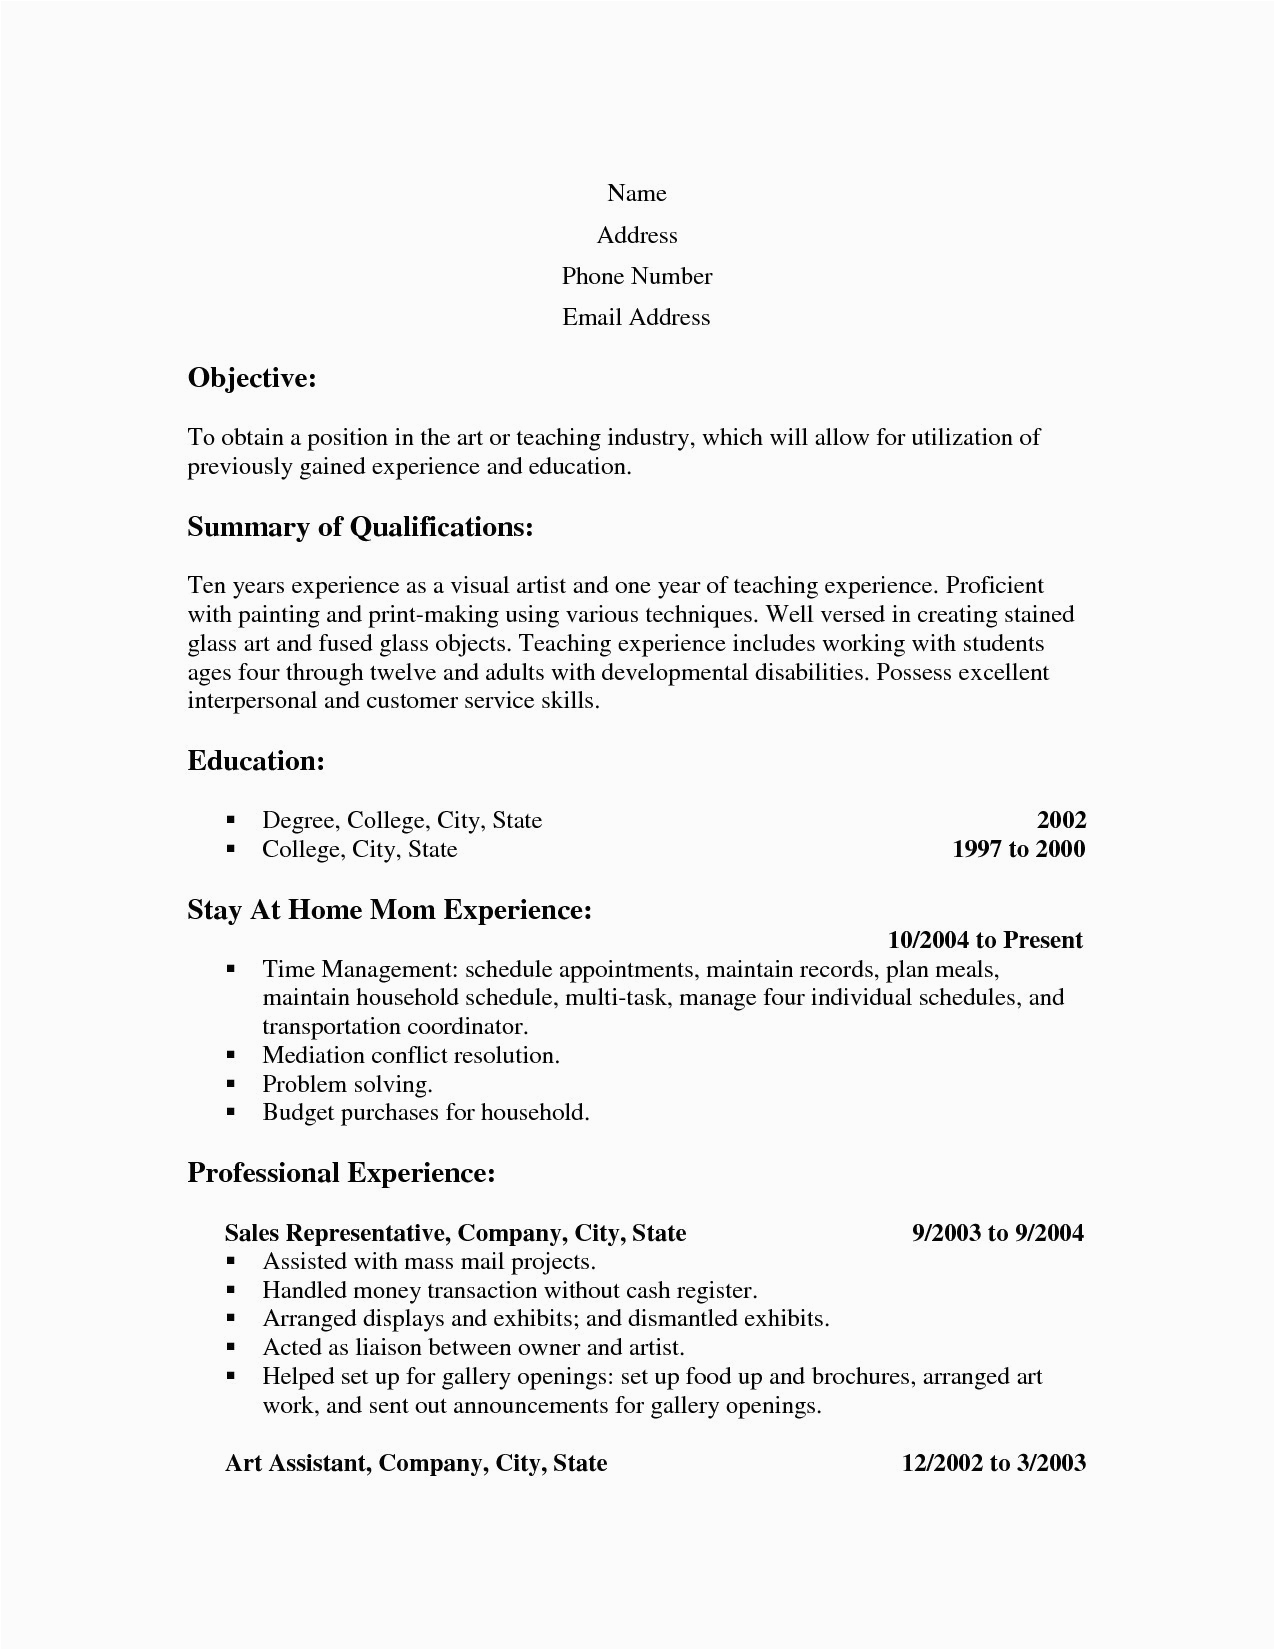 Resume for Stay at Home Mom Returning to Work Template 13 Sample Resume Stay at Home Mom Returning to Work